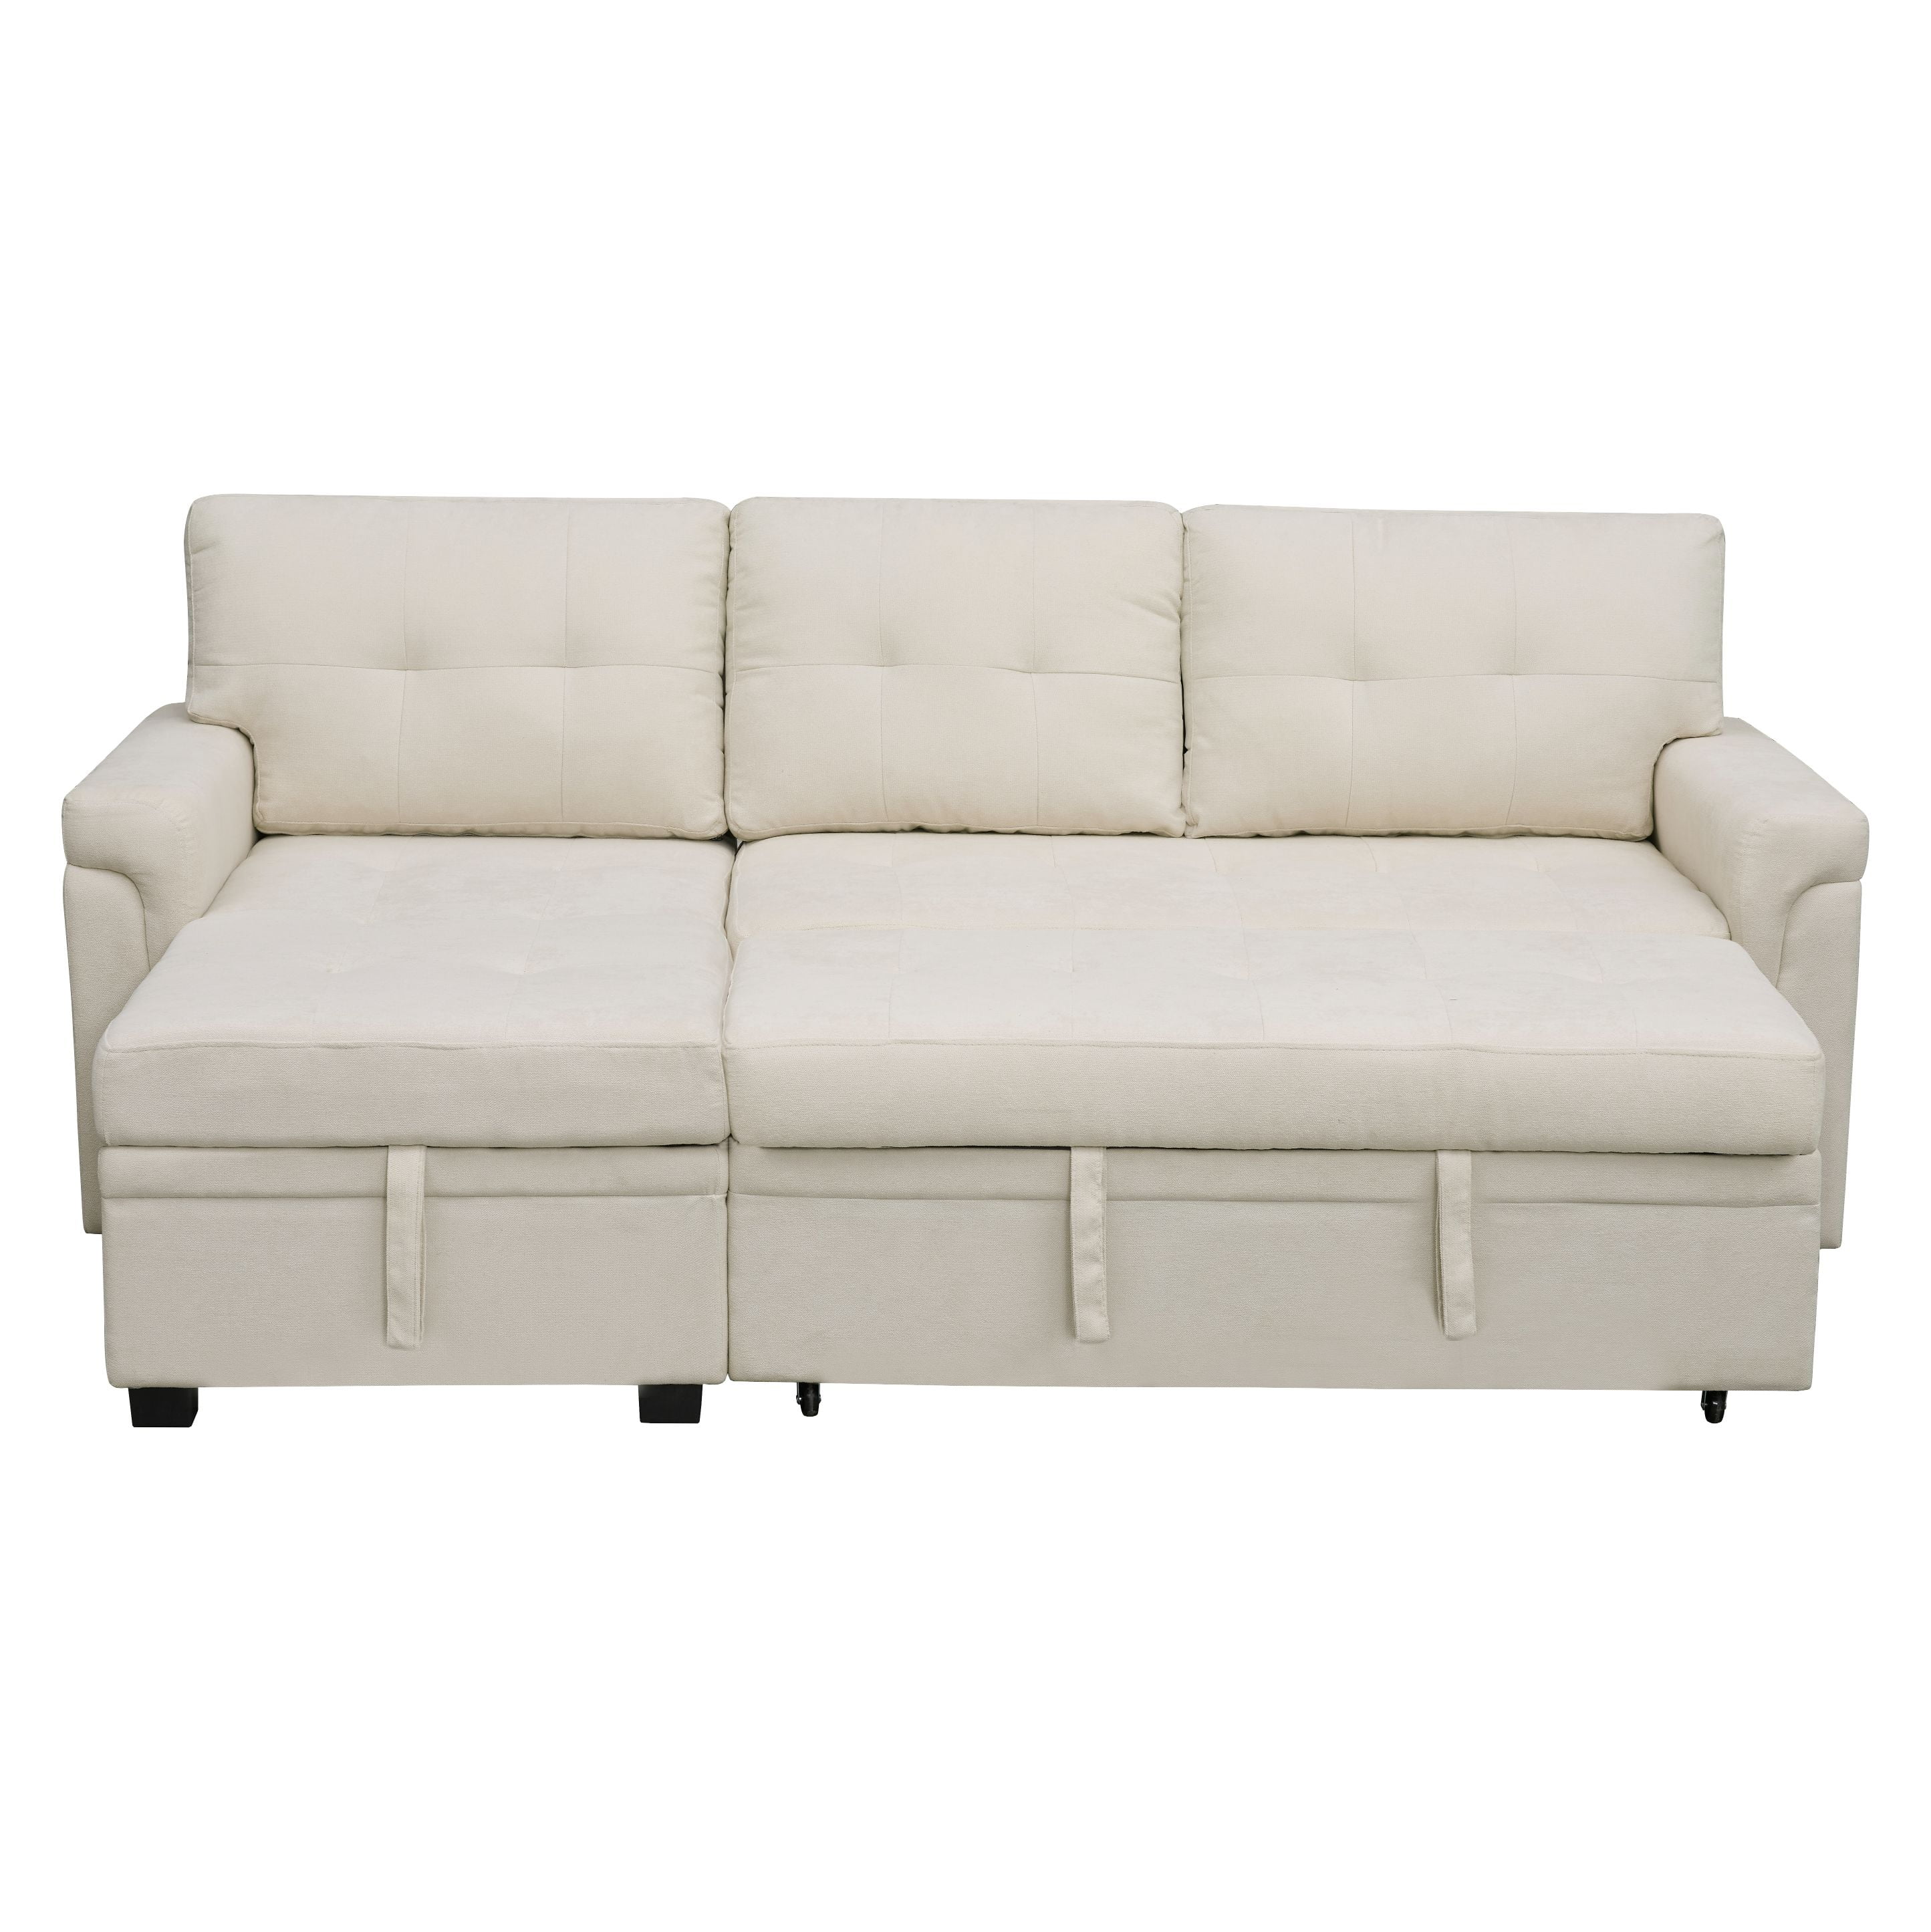 Naomi Home Laura Sectional Sleeper Sofa - Elegant L-Shaped Couch ...